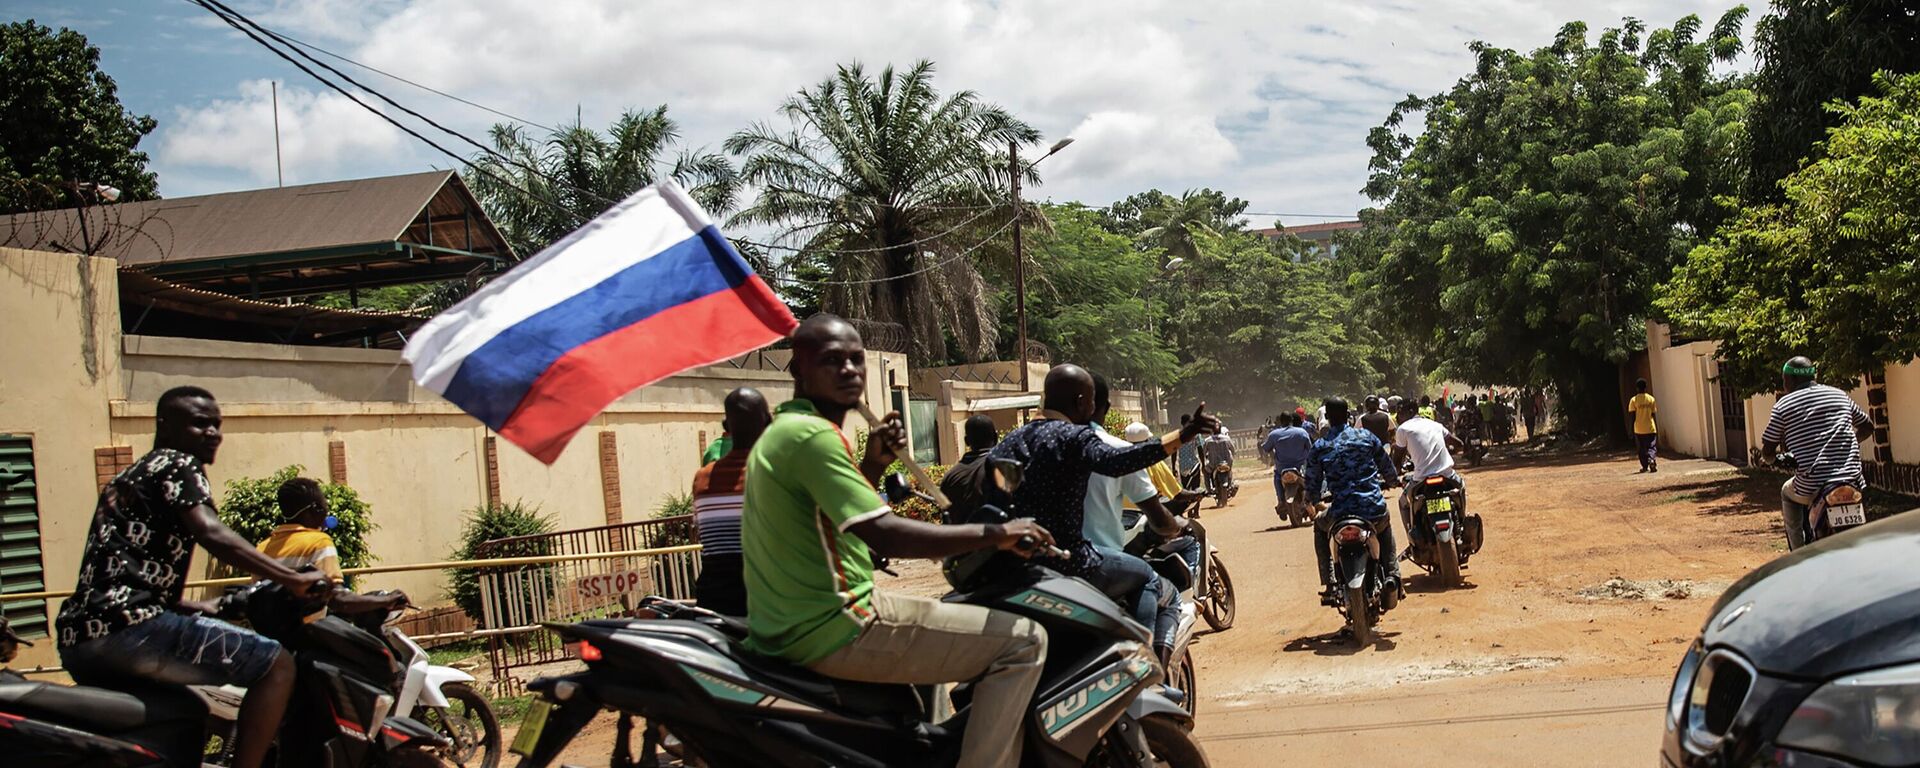 Supporters of Capt. Ibrahim Traore parade waving a Russian flag in the streets of Ouagadougou, Burkina Faso, Sunday, Oct. 2, 2022. Burkina Faso's new junta leadership is calling for calm after the French Embassy and other buildings were attacked. The unrest following the West African nation's second coup this year came after a junta statement alleged that the ousted interim president was at a French military base in Ouagadougou. France vehemently denied the claim and has urged its citizens to stay indoors amid rising anti-French sentiment in the streets. (AP Photo/Sophie Garcia) - Sputnik International, 1920, 02.10.2022